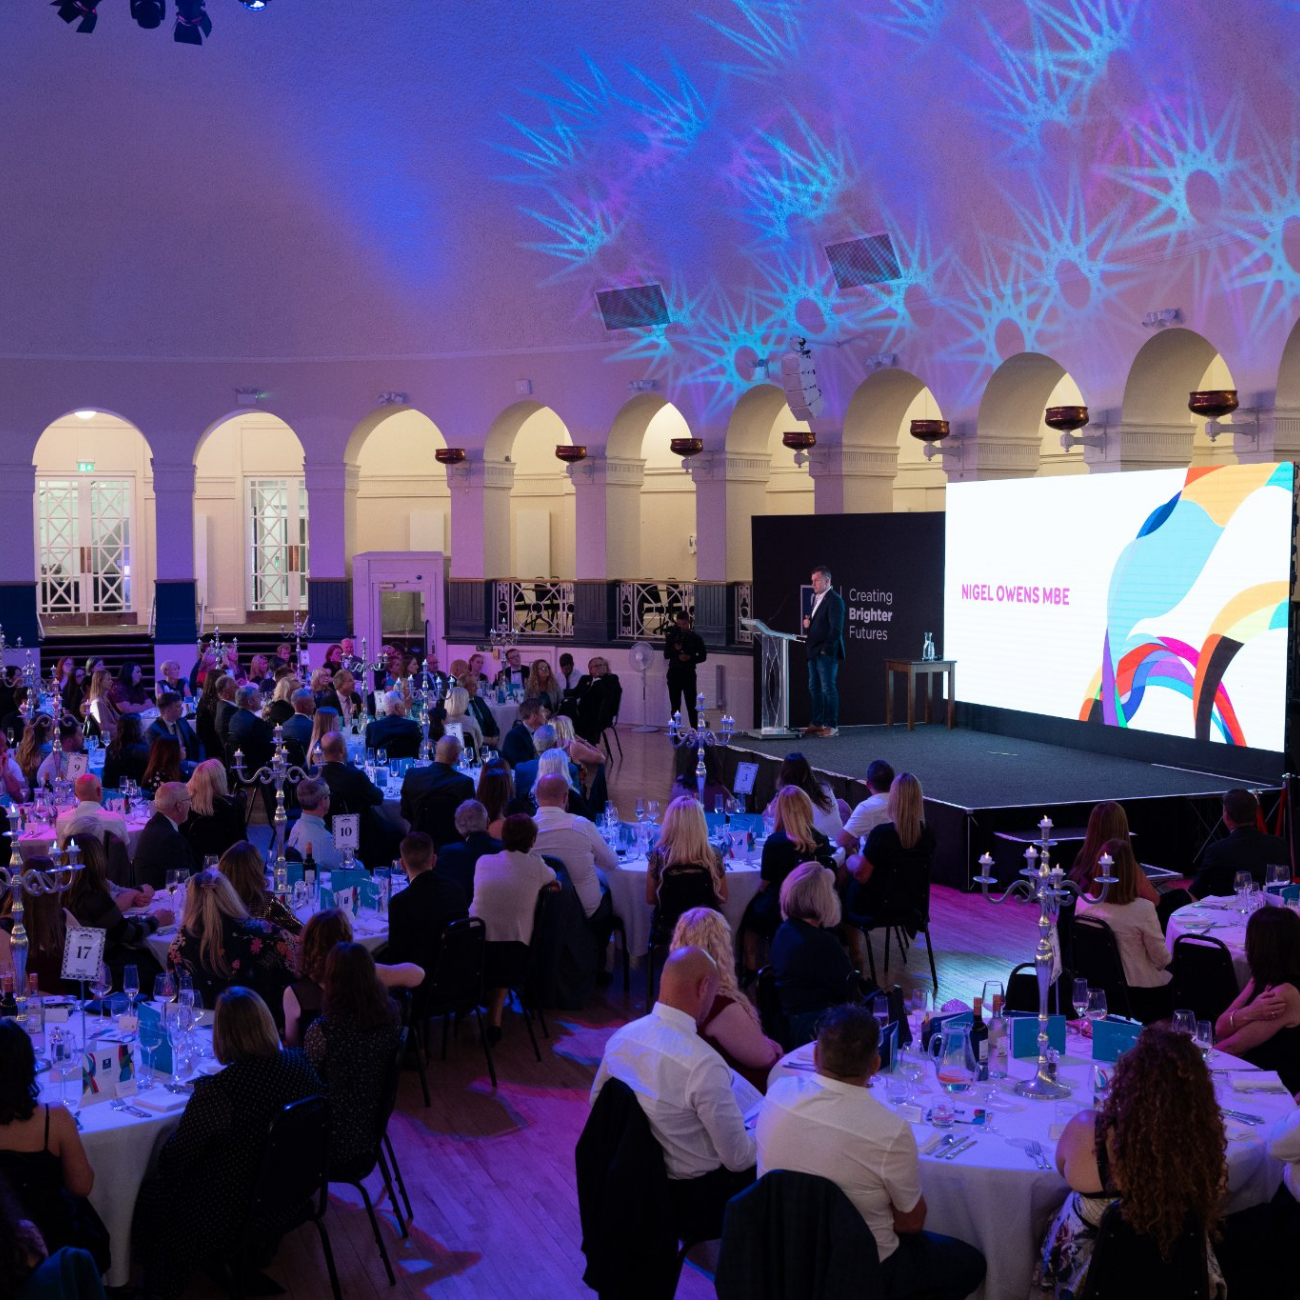 Guests sat at tables in Winter Gardens Ballroom for Business Awards 2022